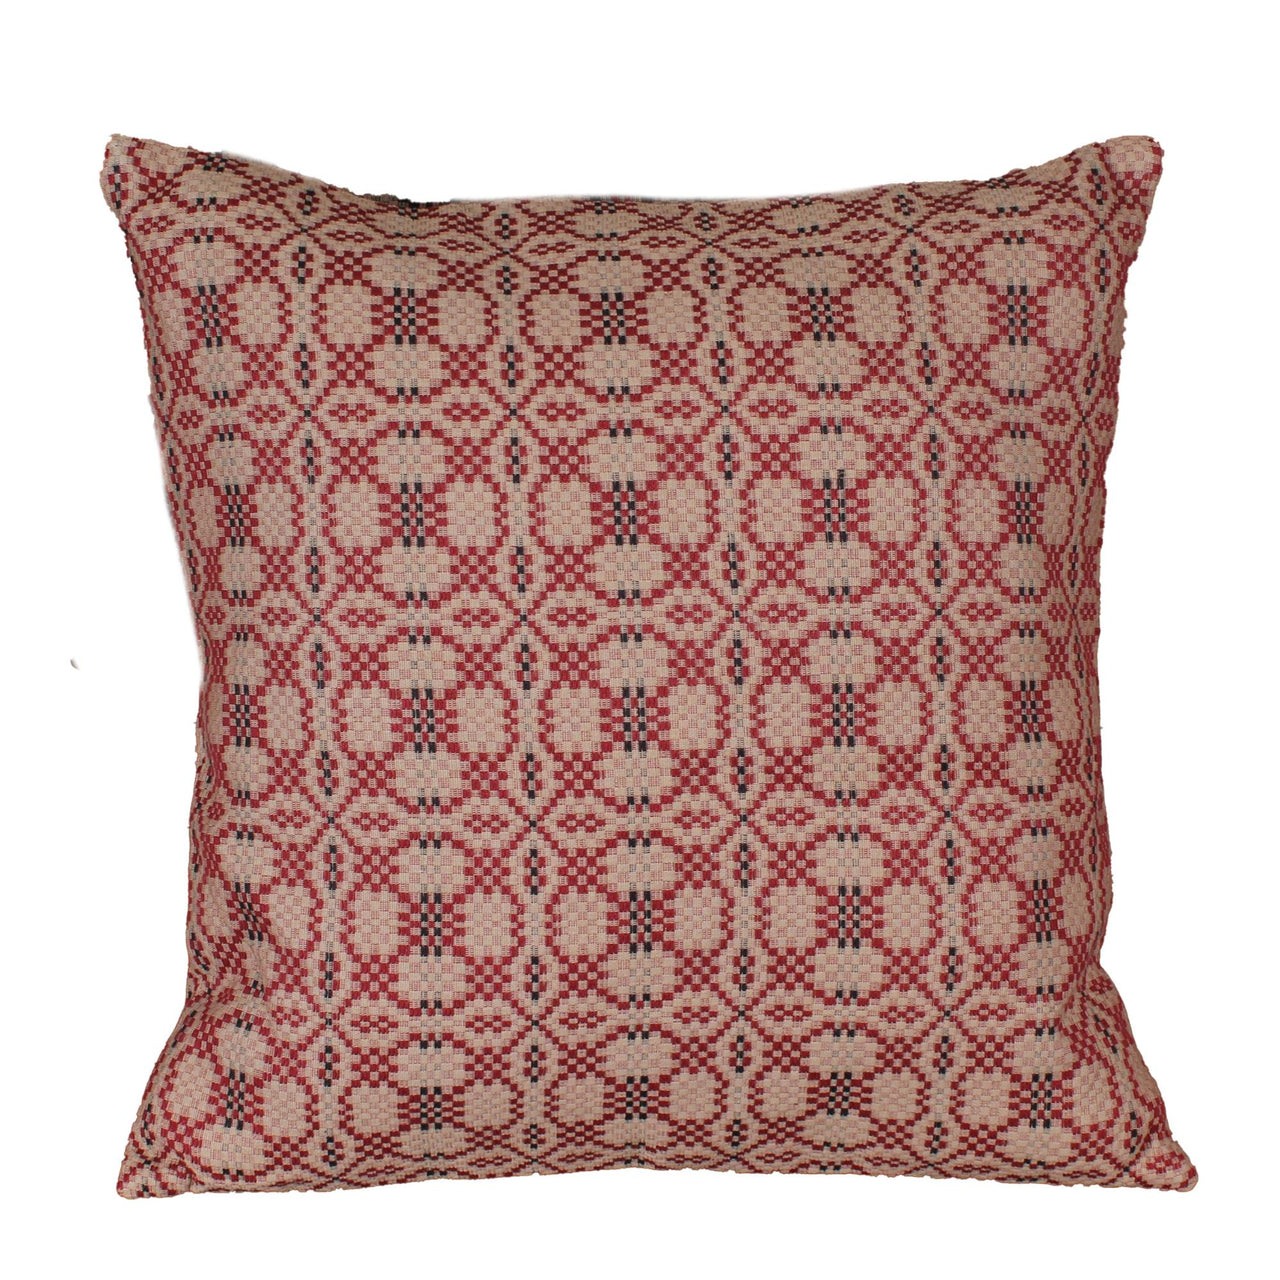 Kendall Jacquard Red Pillow Cover 18 In - Interiors by Elizabeth